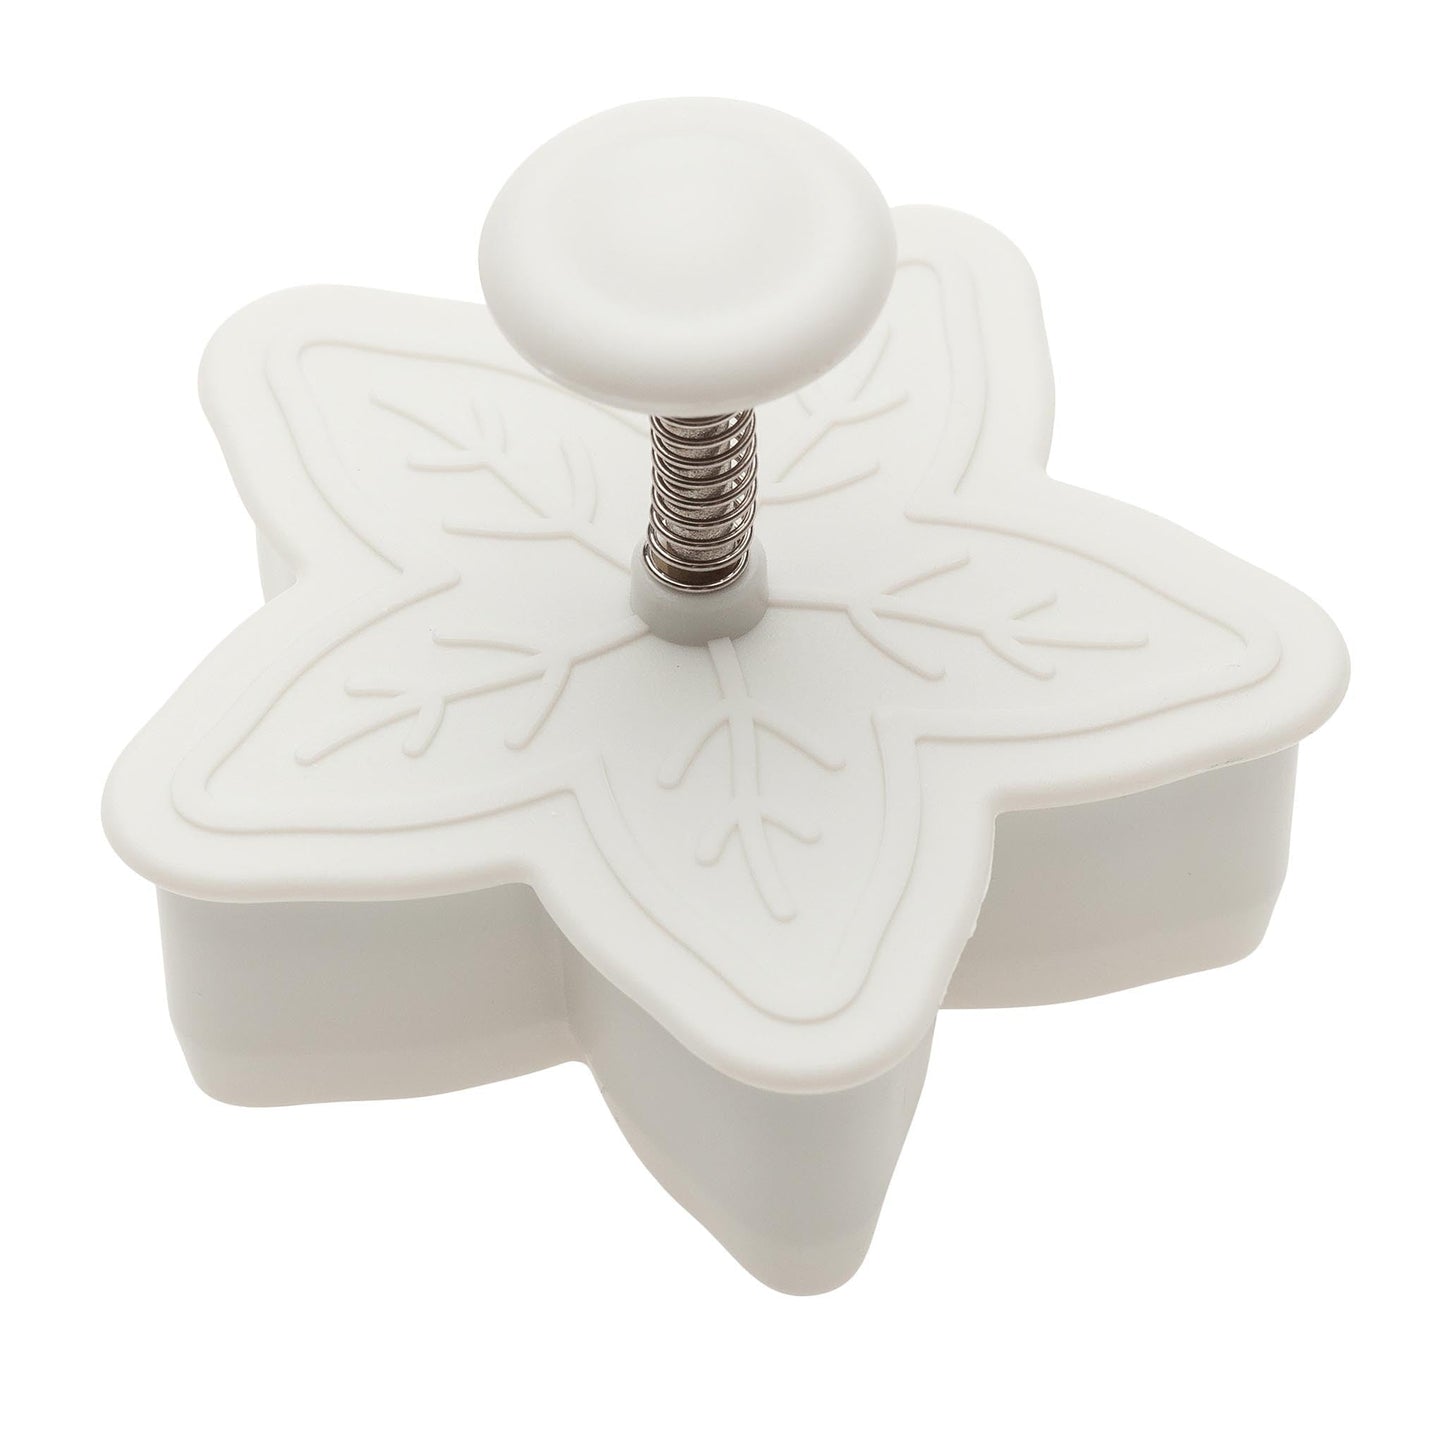 Snowflake Plunger Cutter